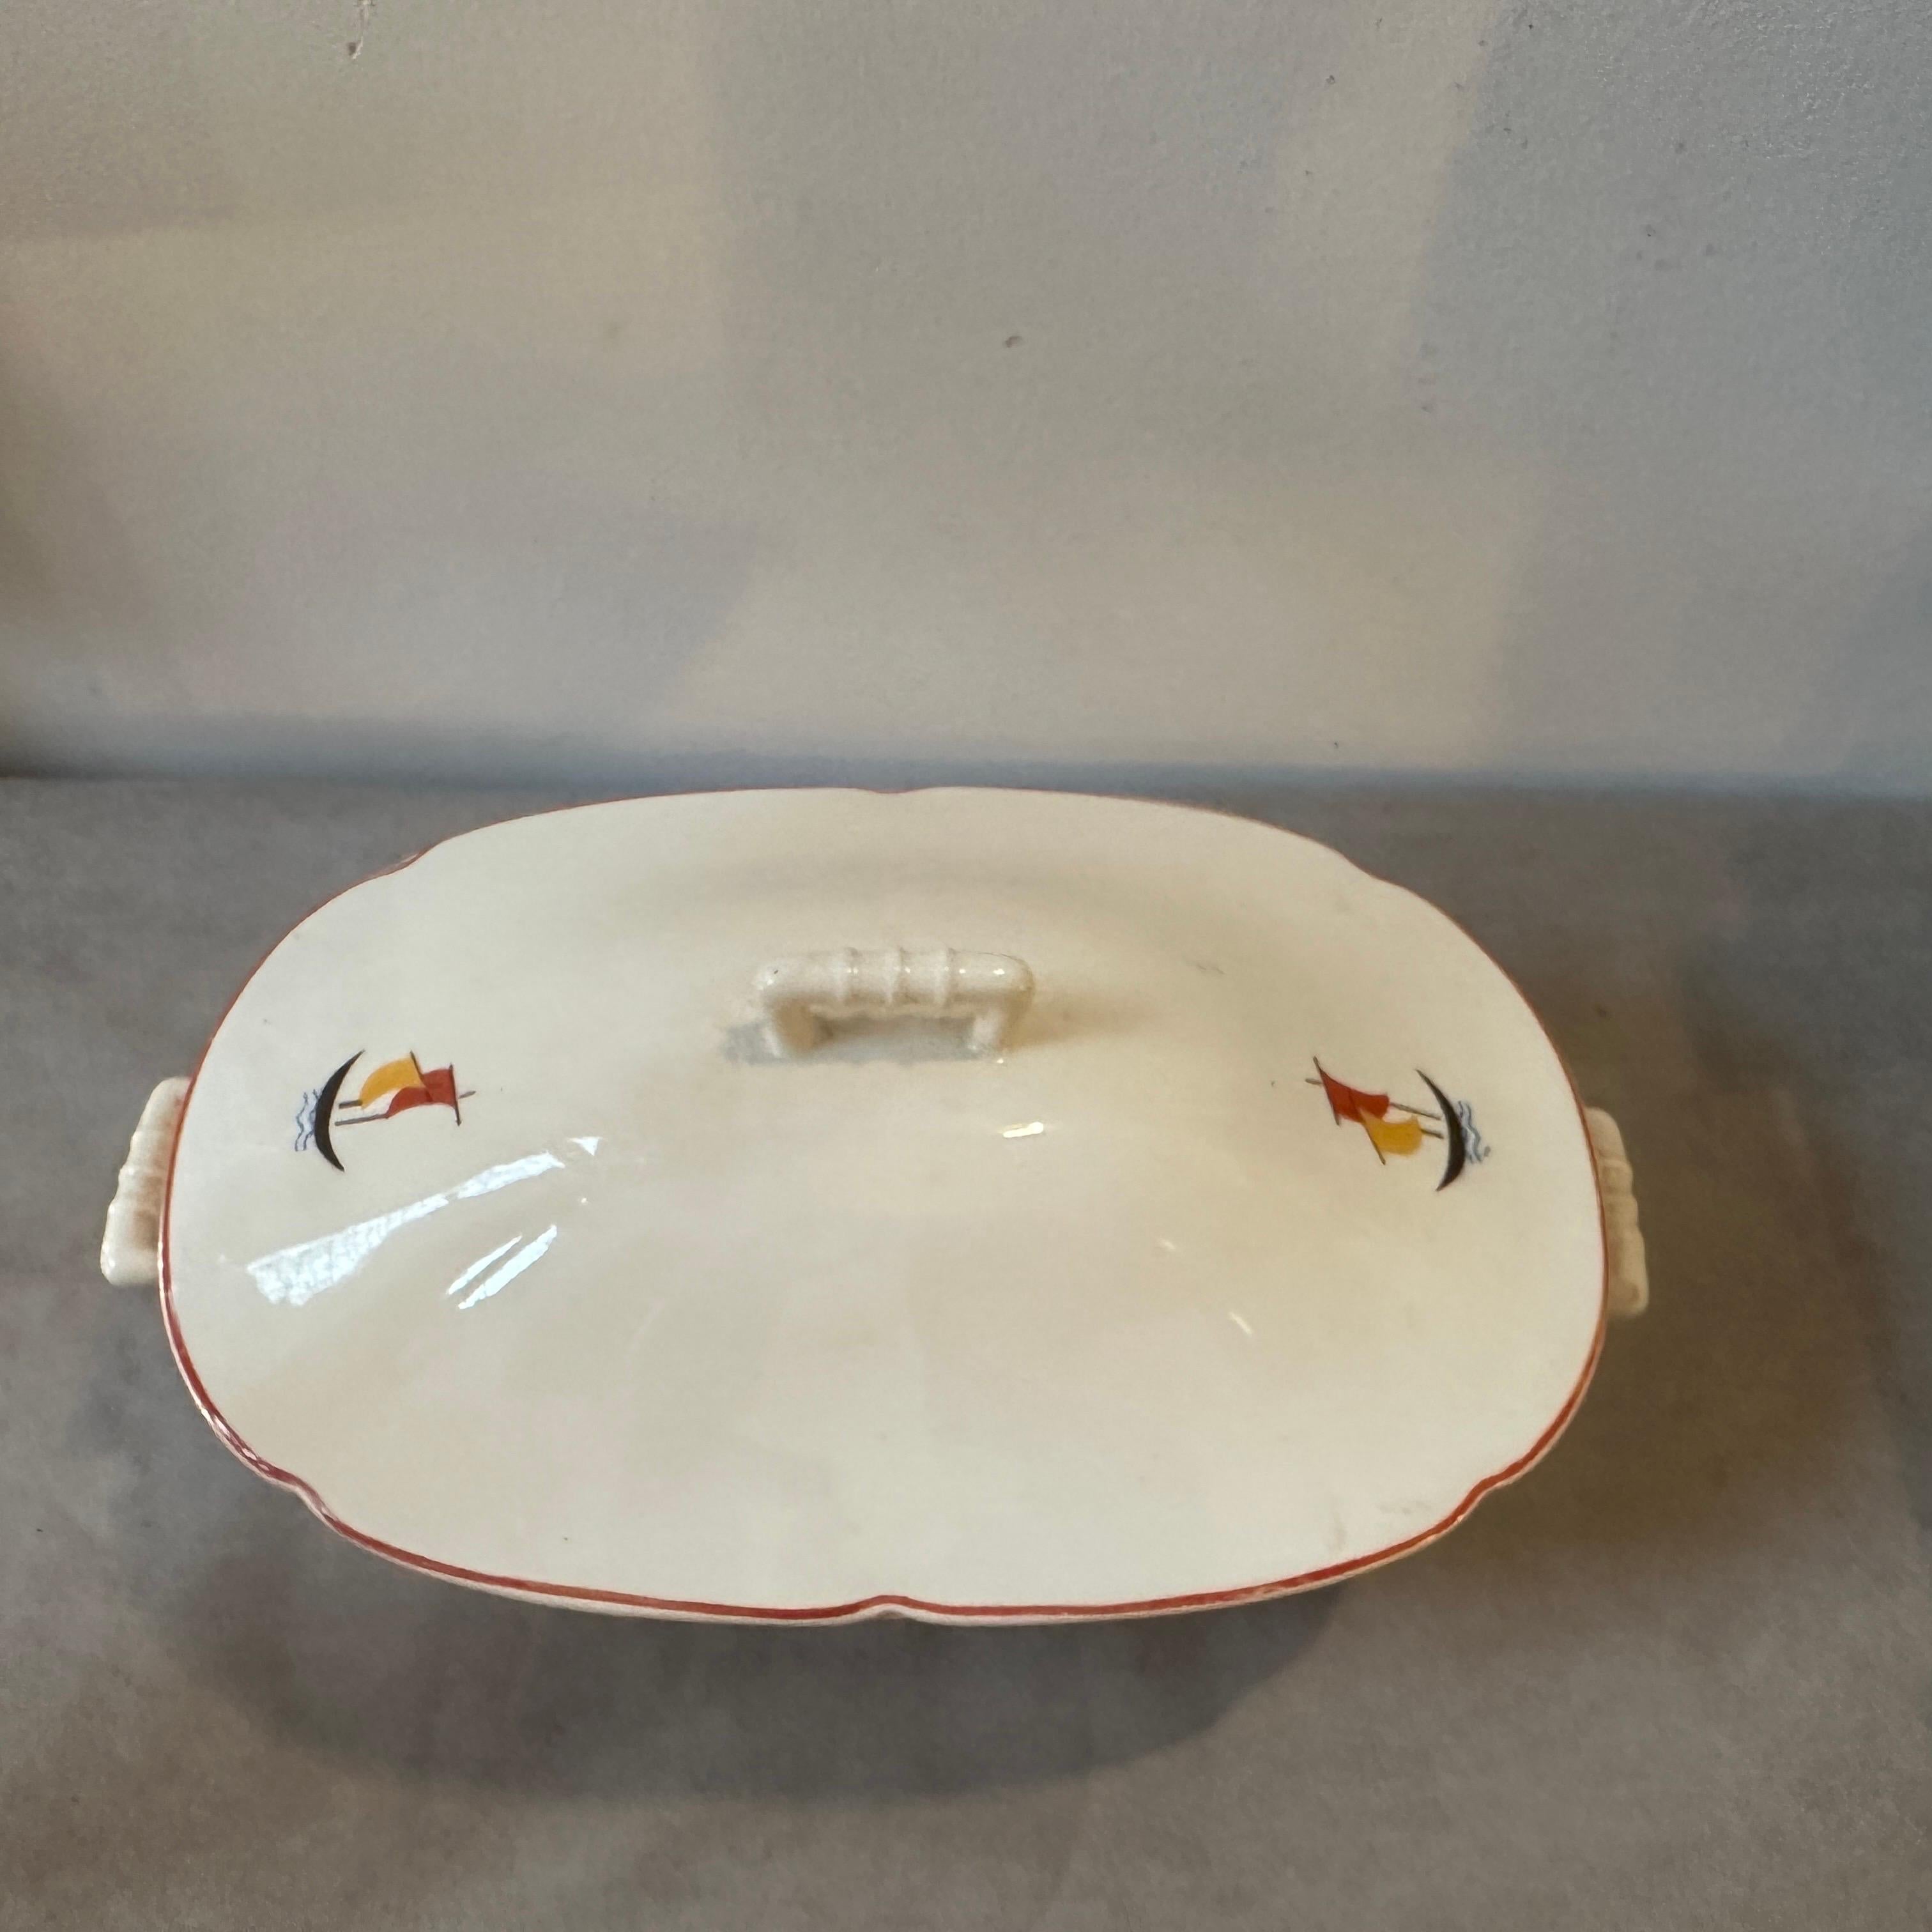 1935s Art Deco Ceramic Soup Tureen by Gio Ponti for S.C. Richard  For Sale 2